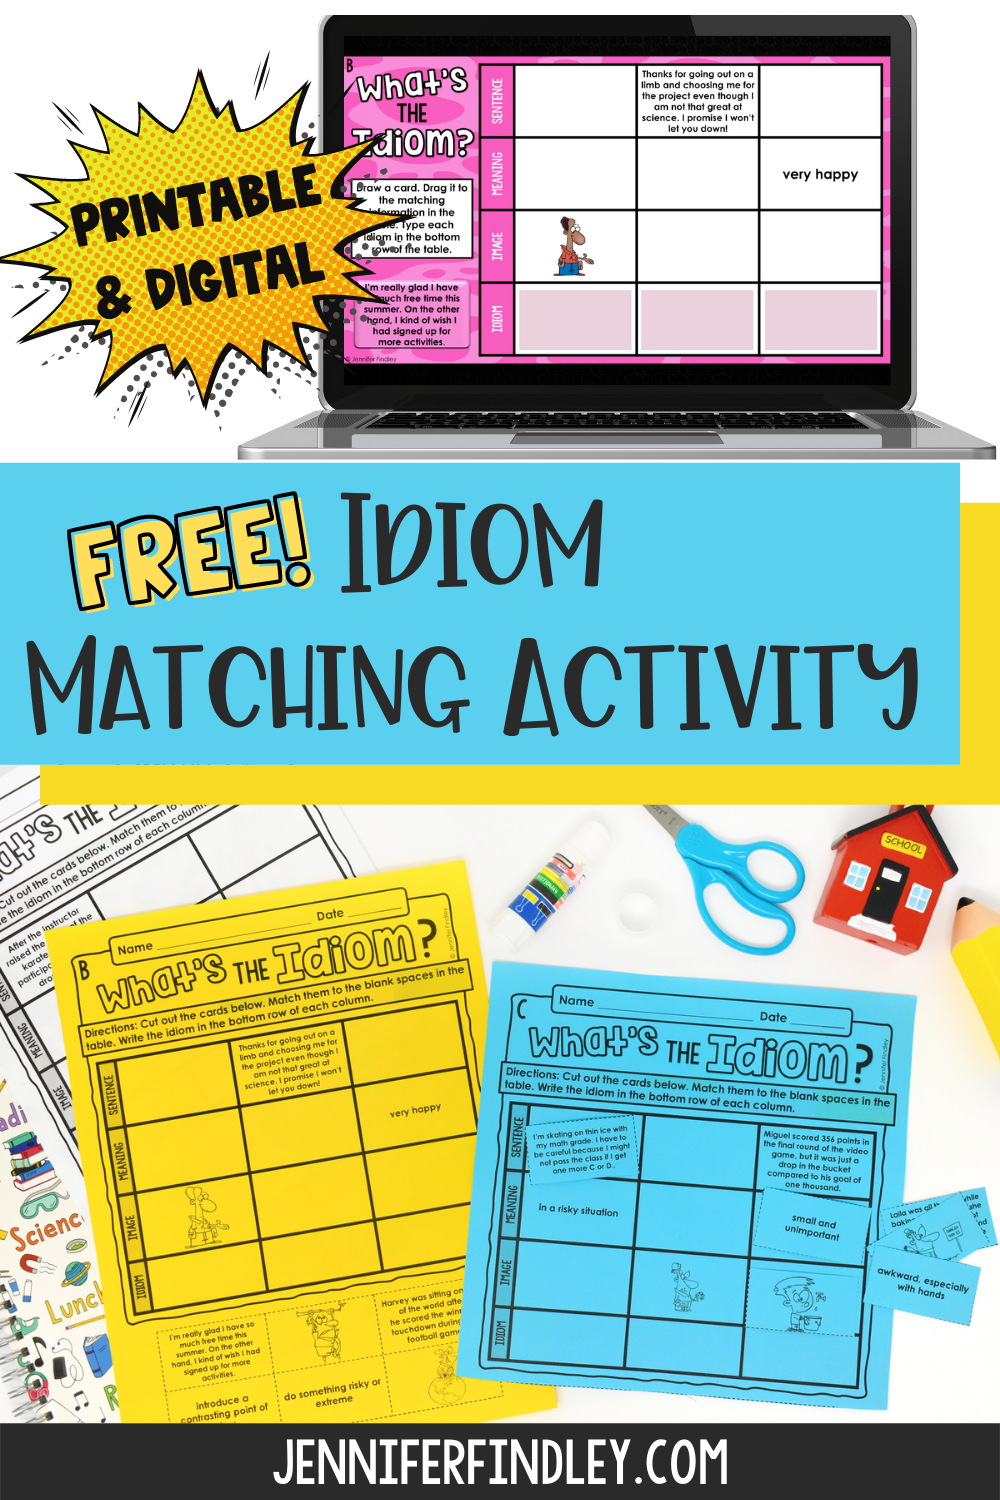 Practice idioms with this sorting activity.